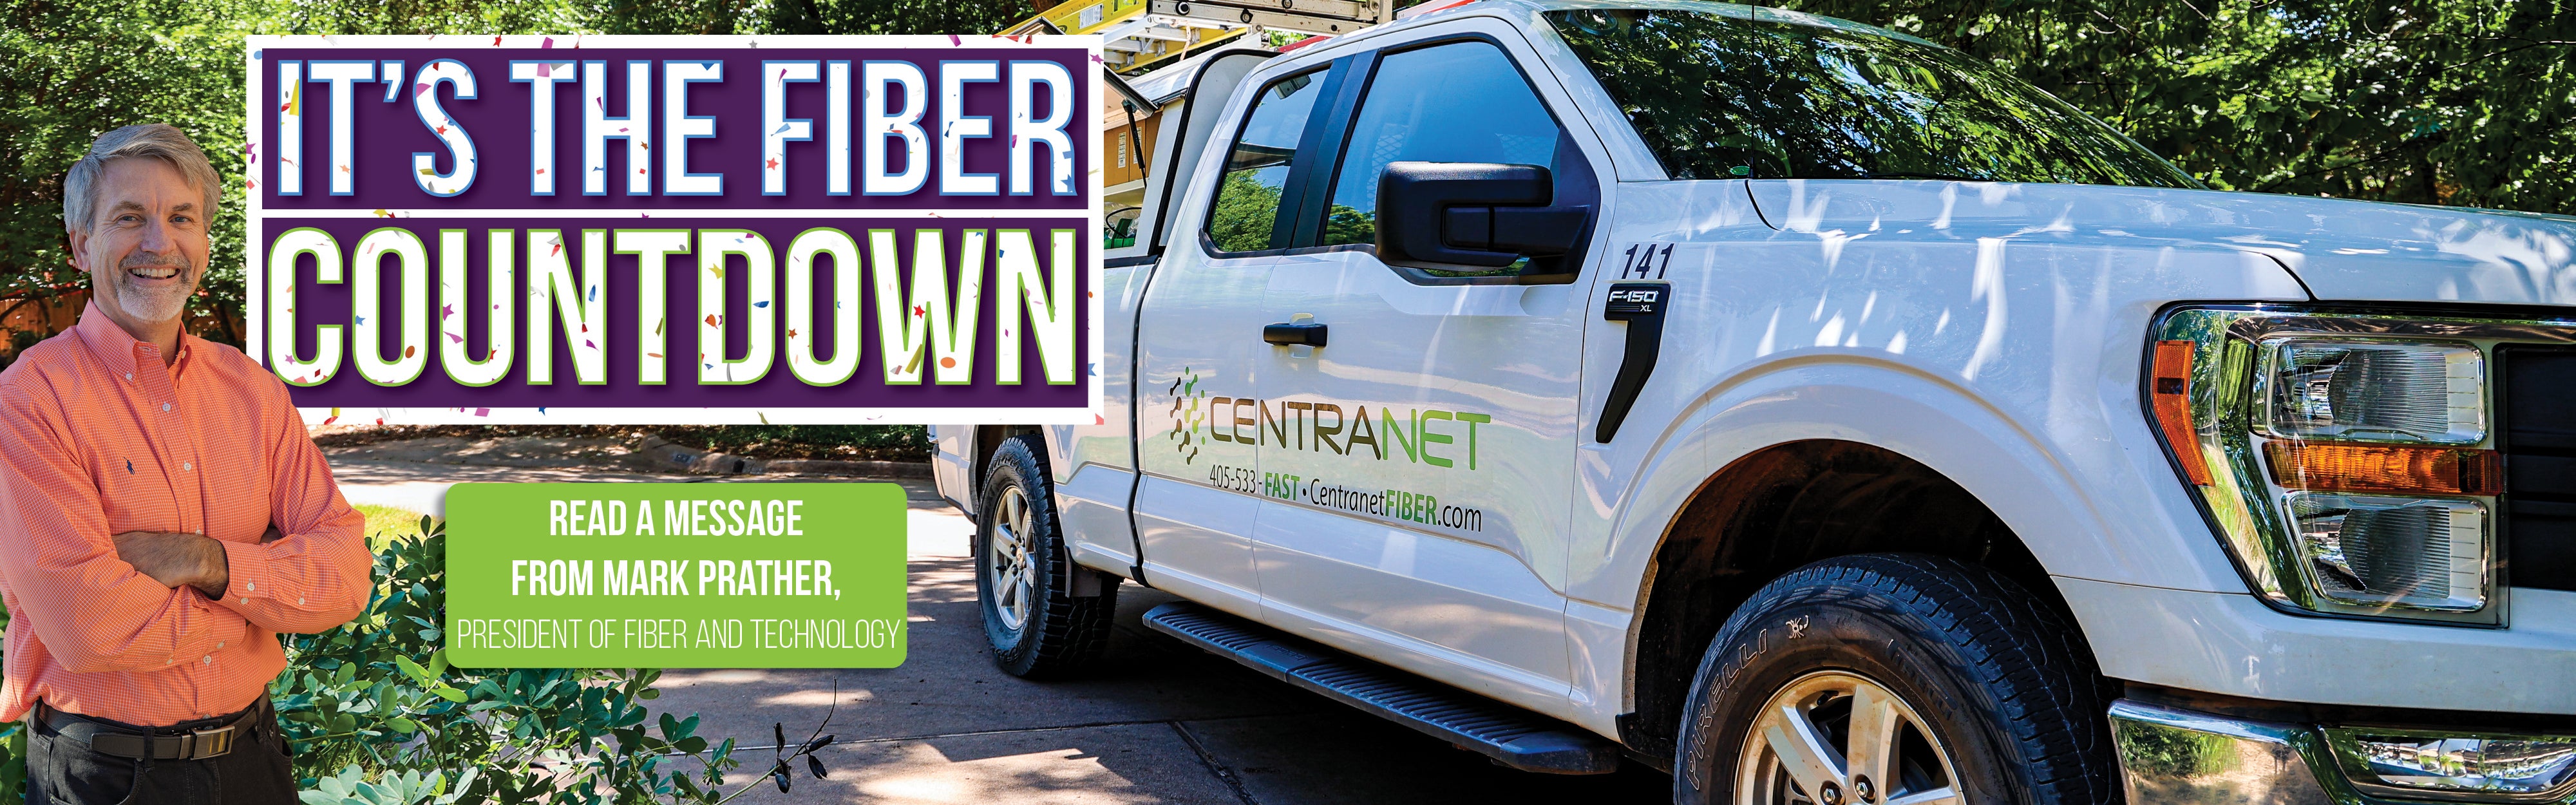 It's the fiber countdown! Read a message from Mark Prather, President of Fiber and Technology